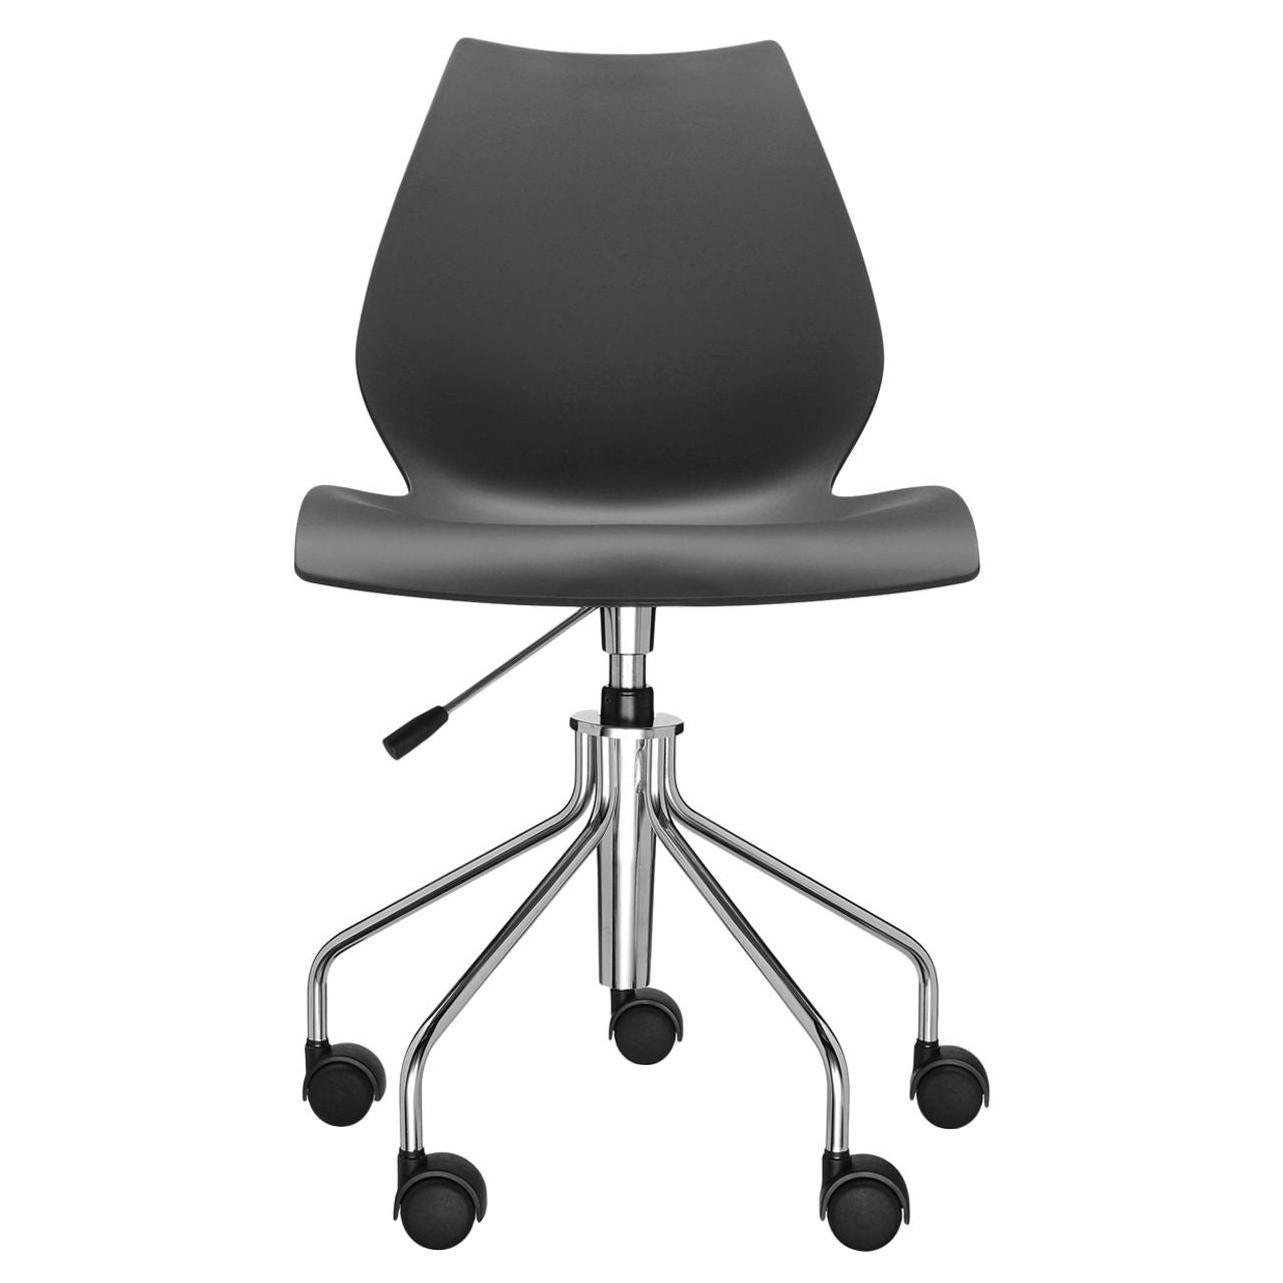 Kartell Maui Swivel Chair Adjustable in Anthracite by Vico Magistretti